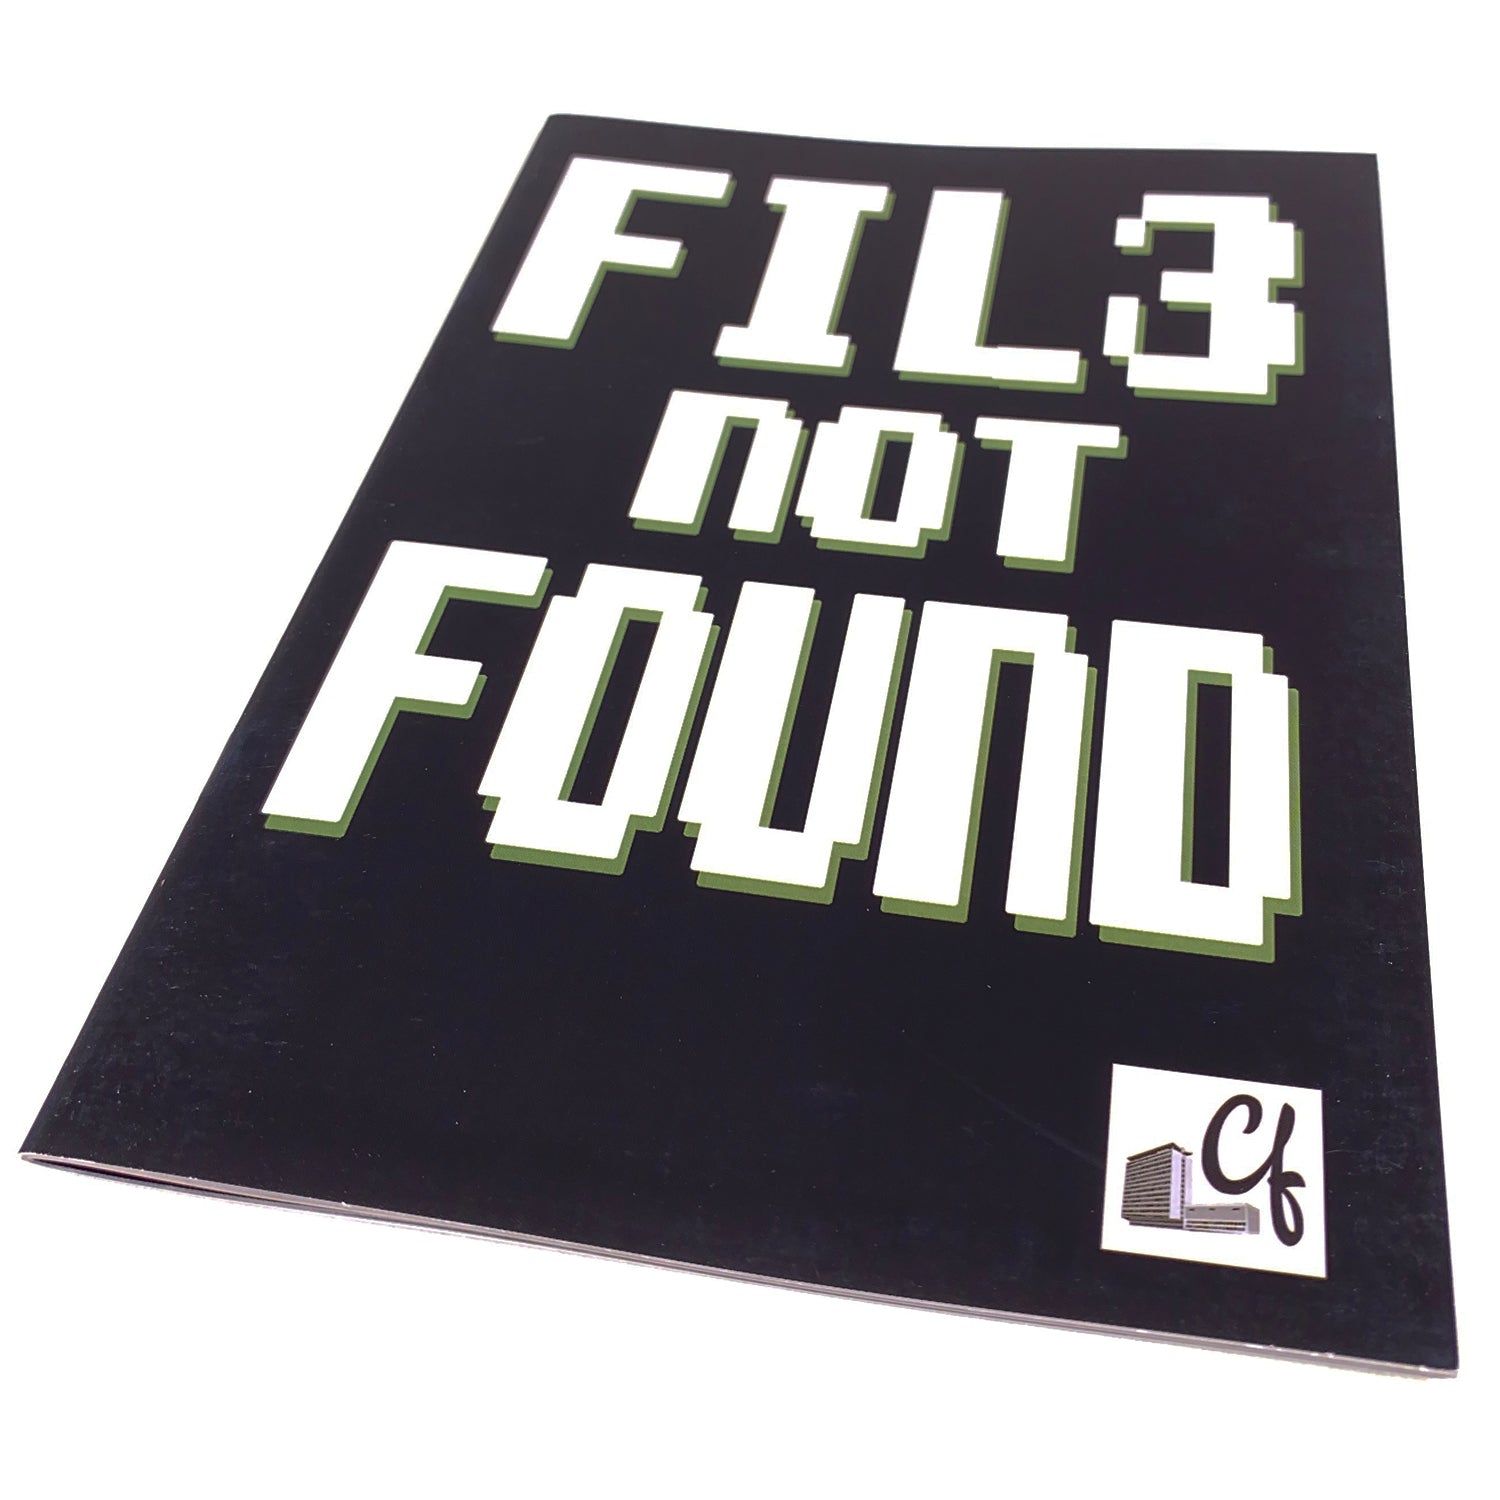 File Not Found Zine - Issue 3 - Prime Delux Store